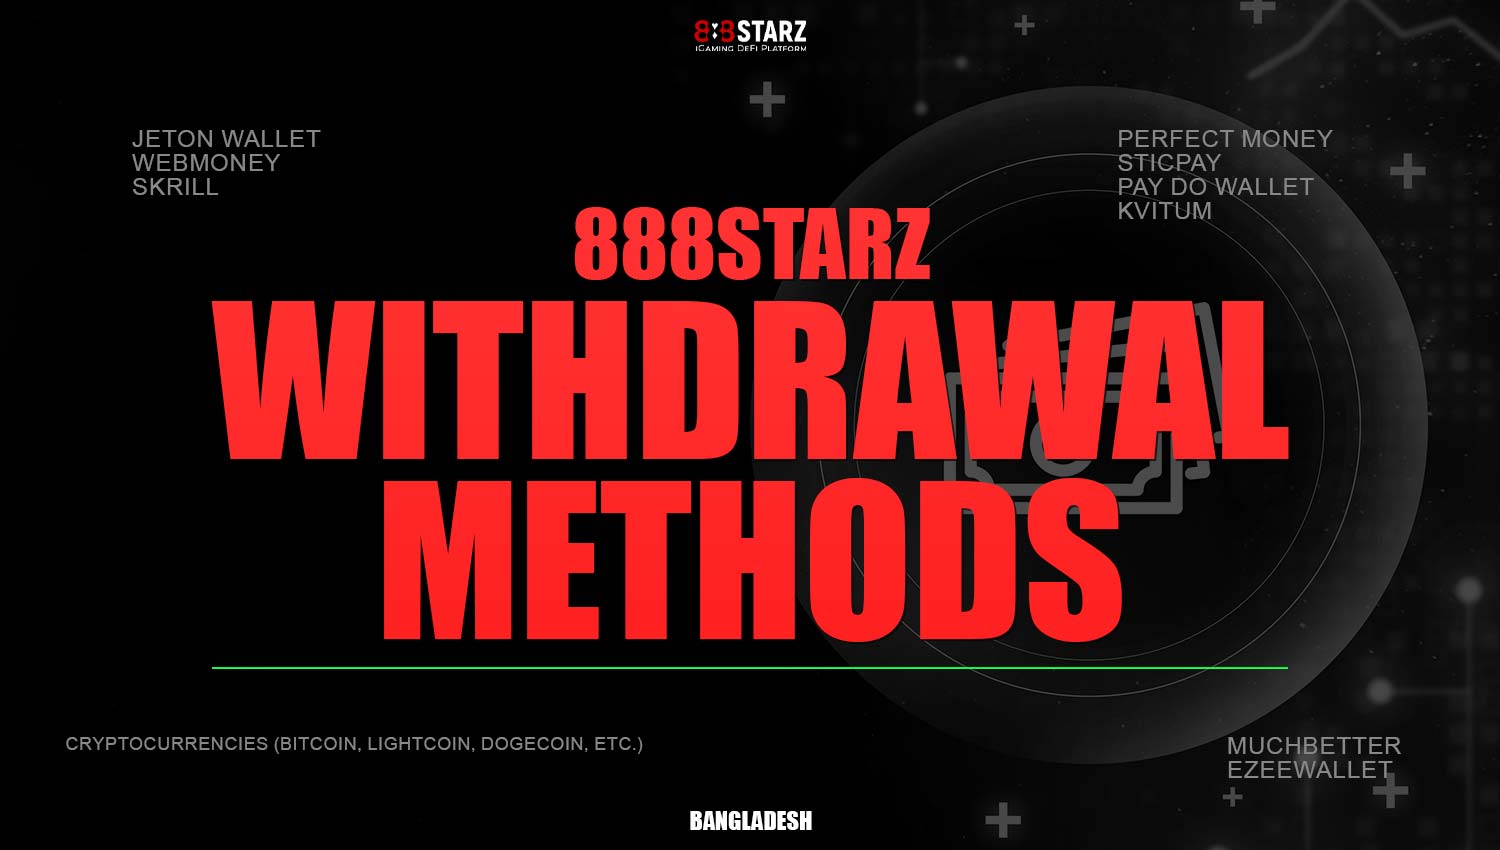 Withdrawal methods available on the 888Starz platform.